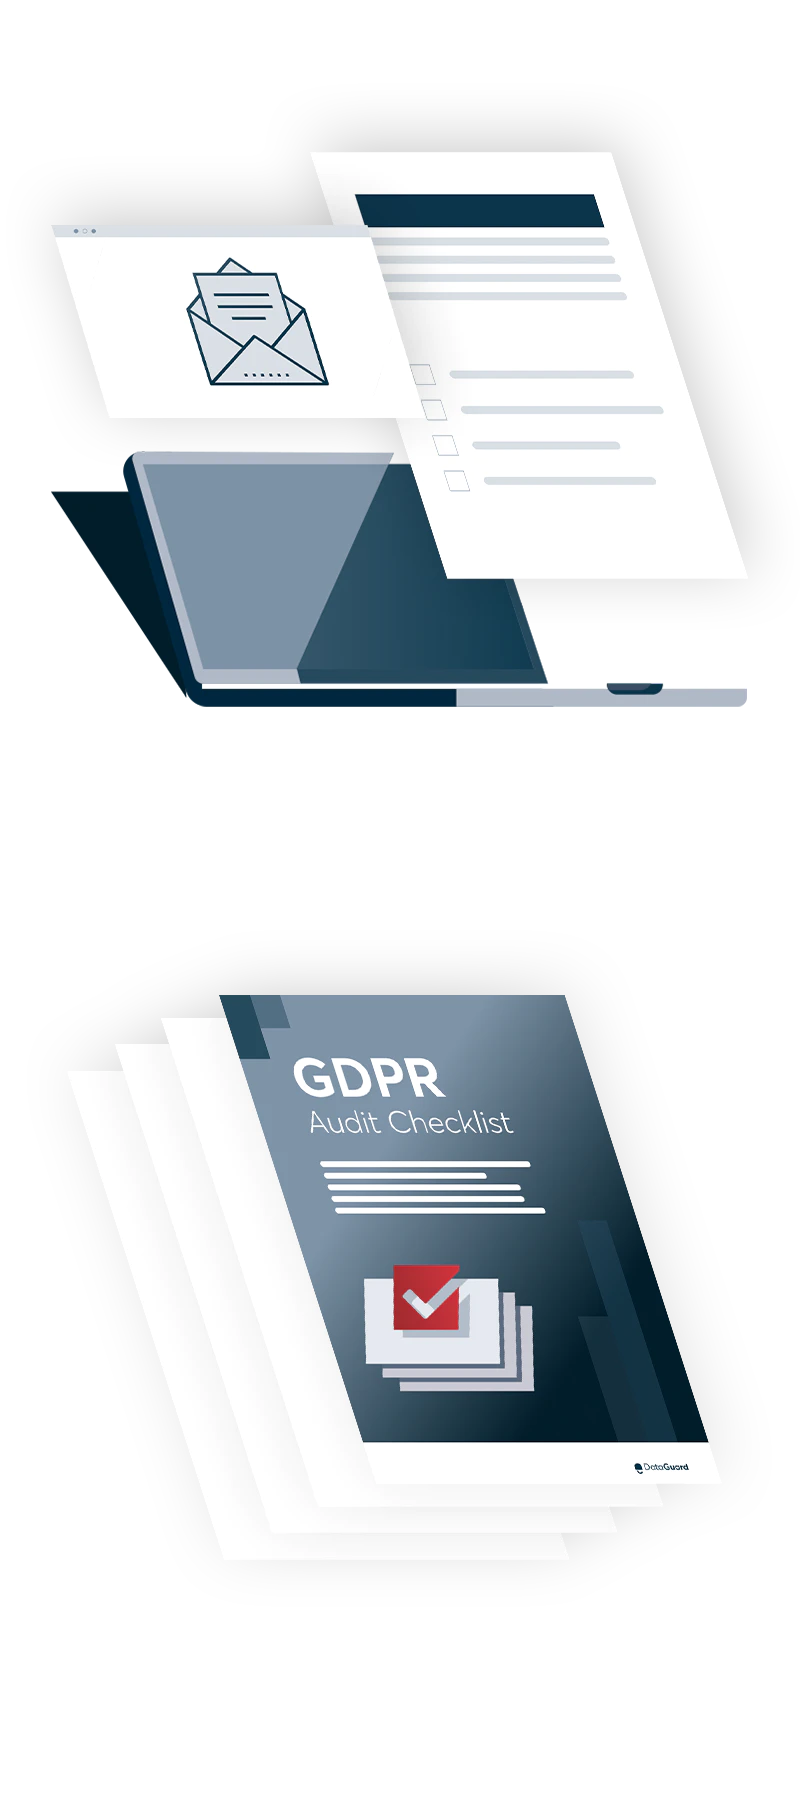 Prepare for your GDPR Audit